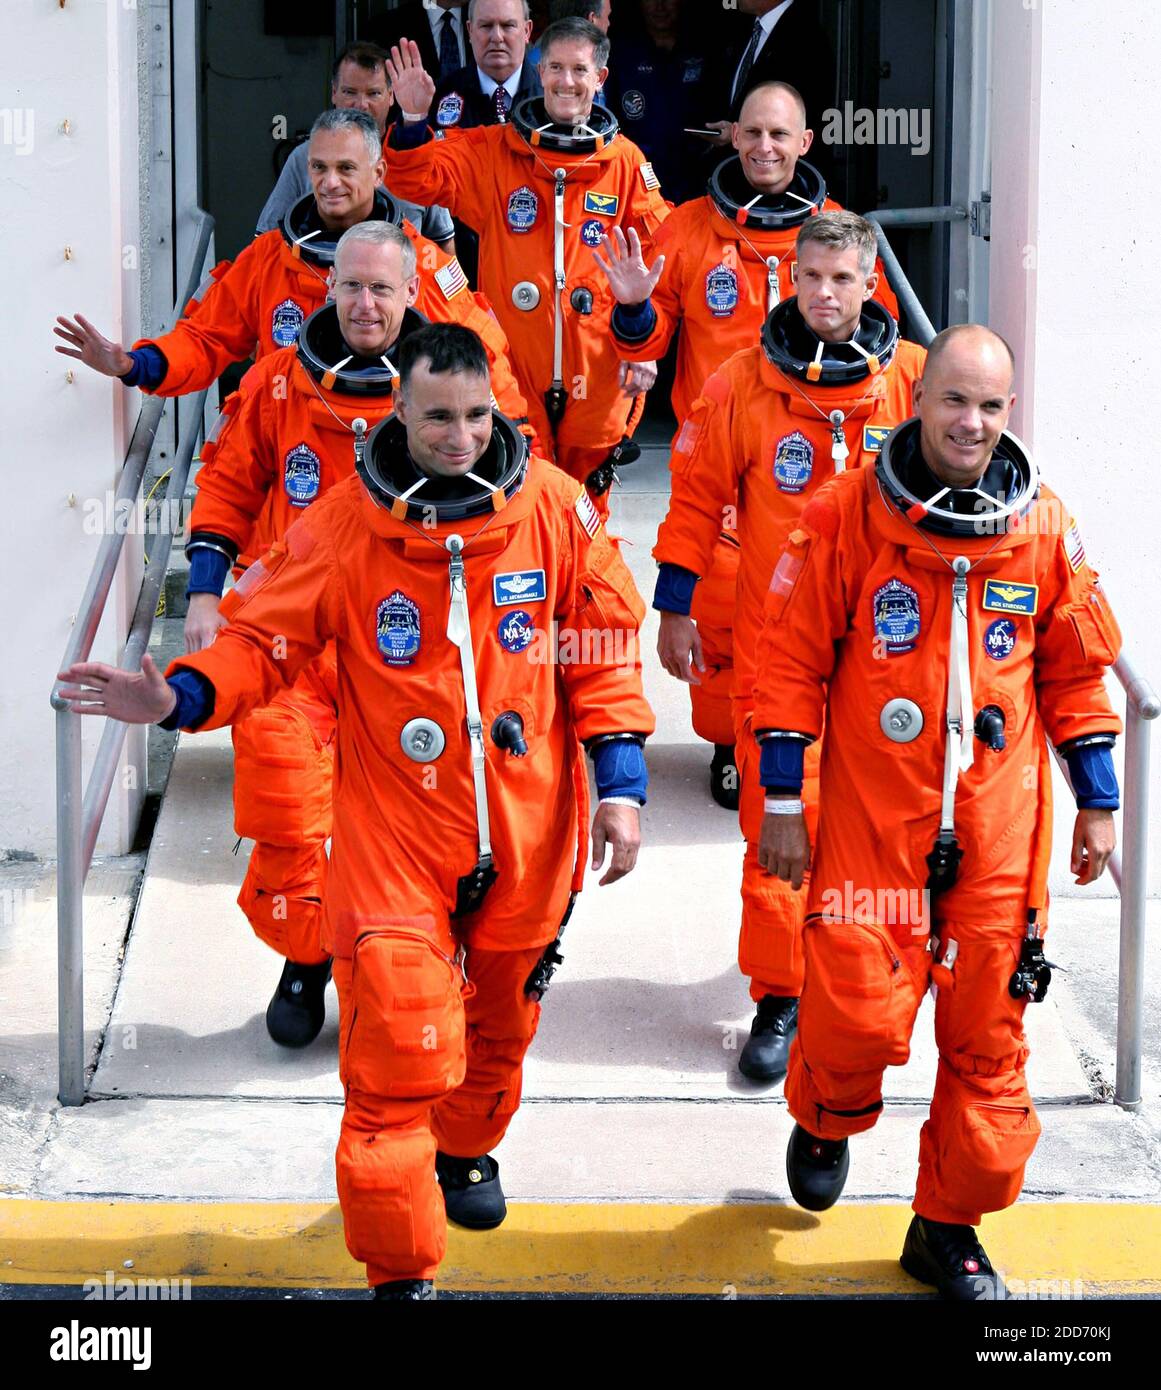 NO FILM, NO VIDEO, NO TV, NO DOCUMENTARY - Space Shuttle Atlantis astronauts (first row, left-right) Pilot Lee Archambault, Commander Frederick Stueckow, (second row, left-right) Patrick Forrester, Steven Swanson, (third row, left-right) John Olivas, Clayton Anderson and James Reilly, all mission specialist, leave the Operations and Checkout Building in Cape Canaveral, FL, USA on Friday, June 8, 2007. Photo by Red Huber/Orlando Sentinel/MCT/ABACAPRESS.COM Stock Photo